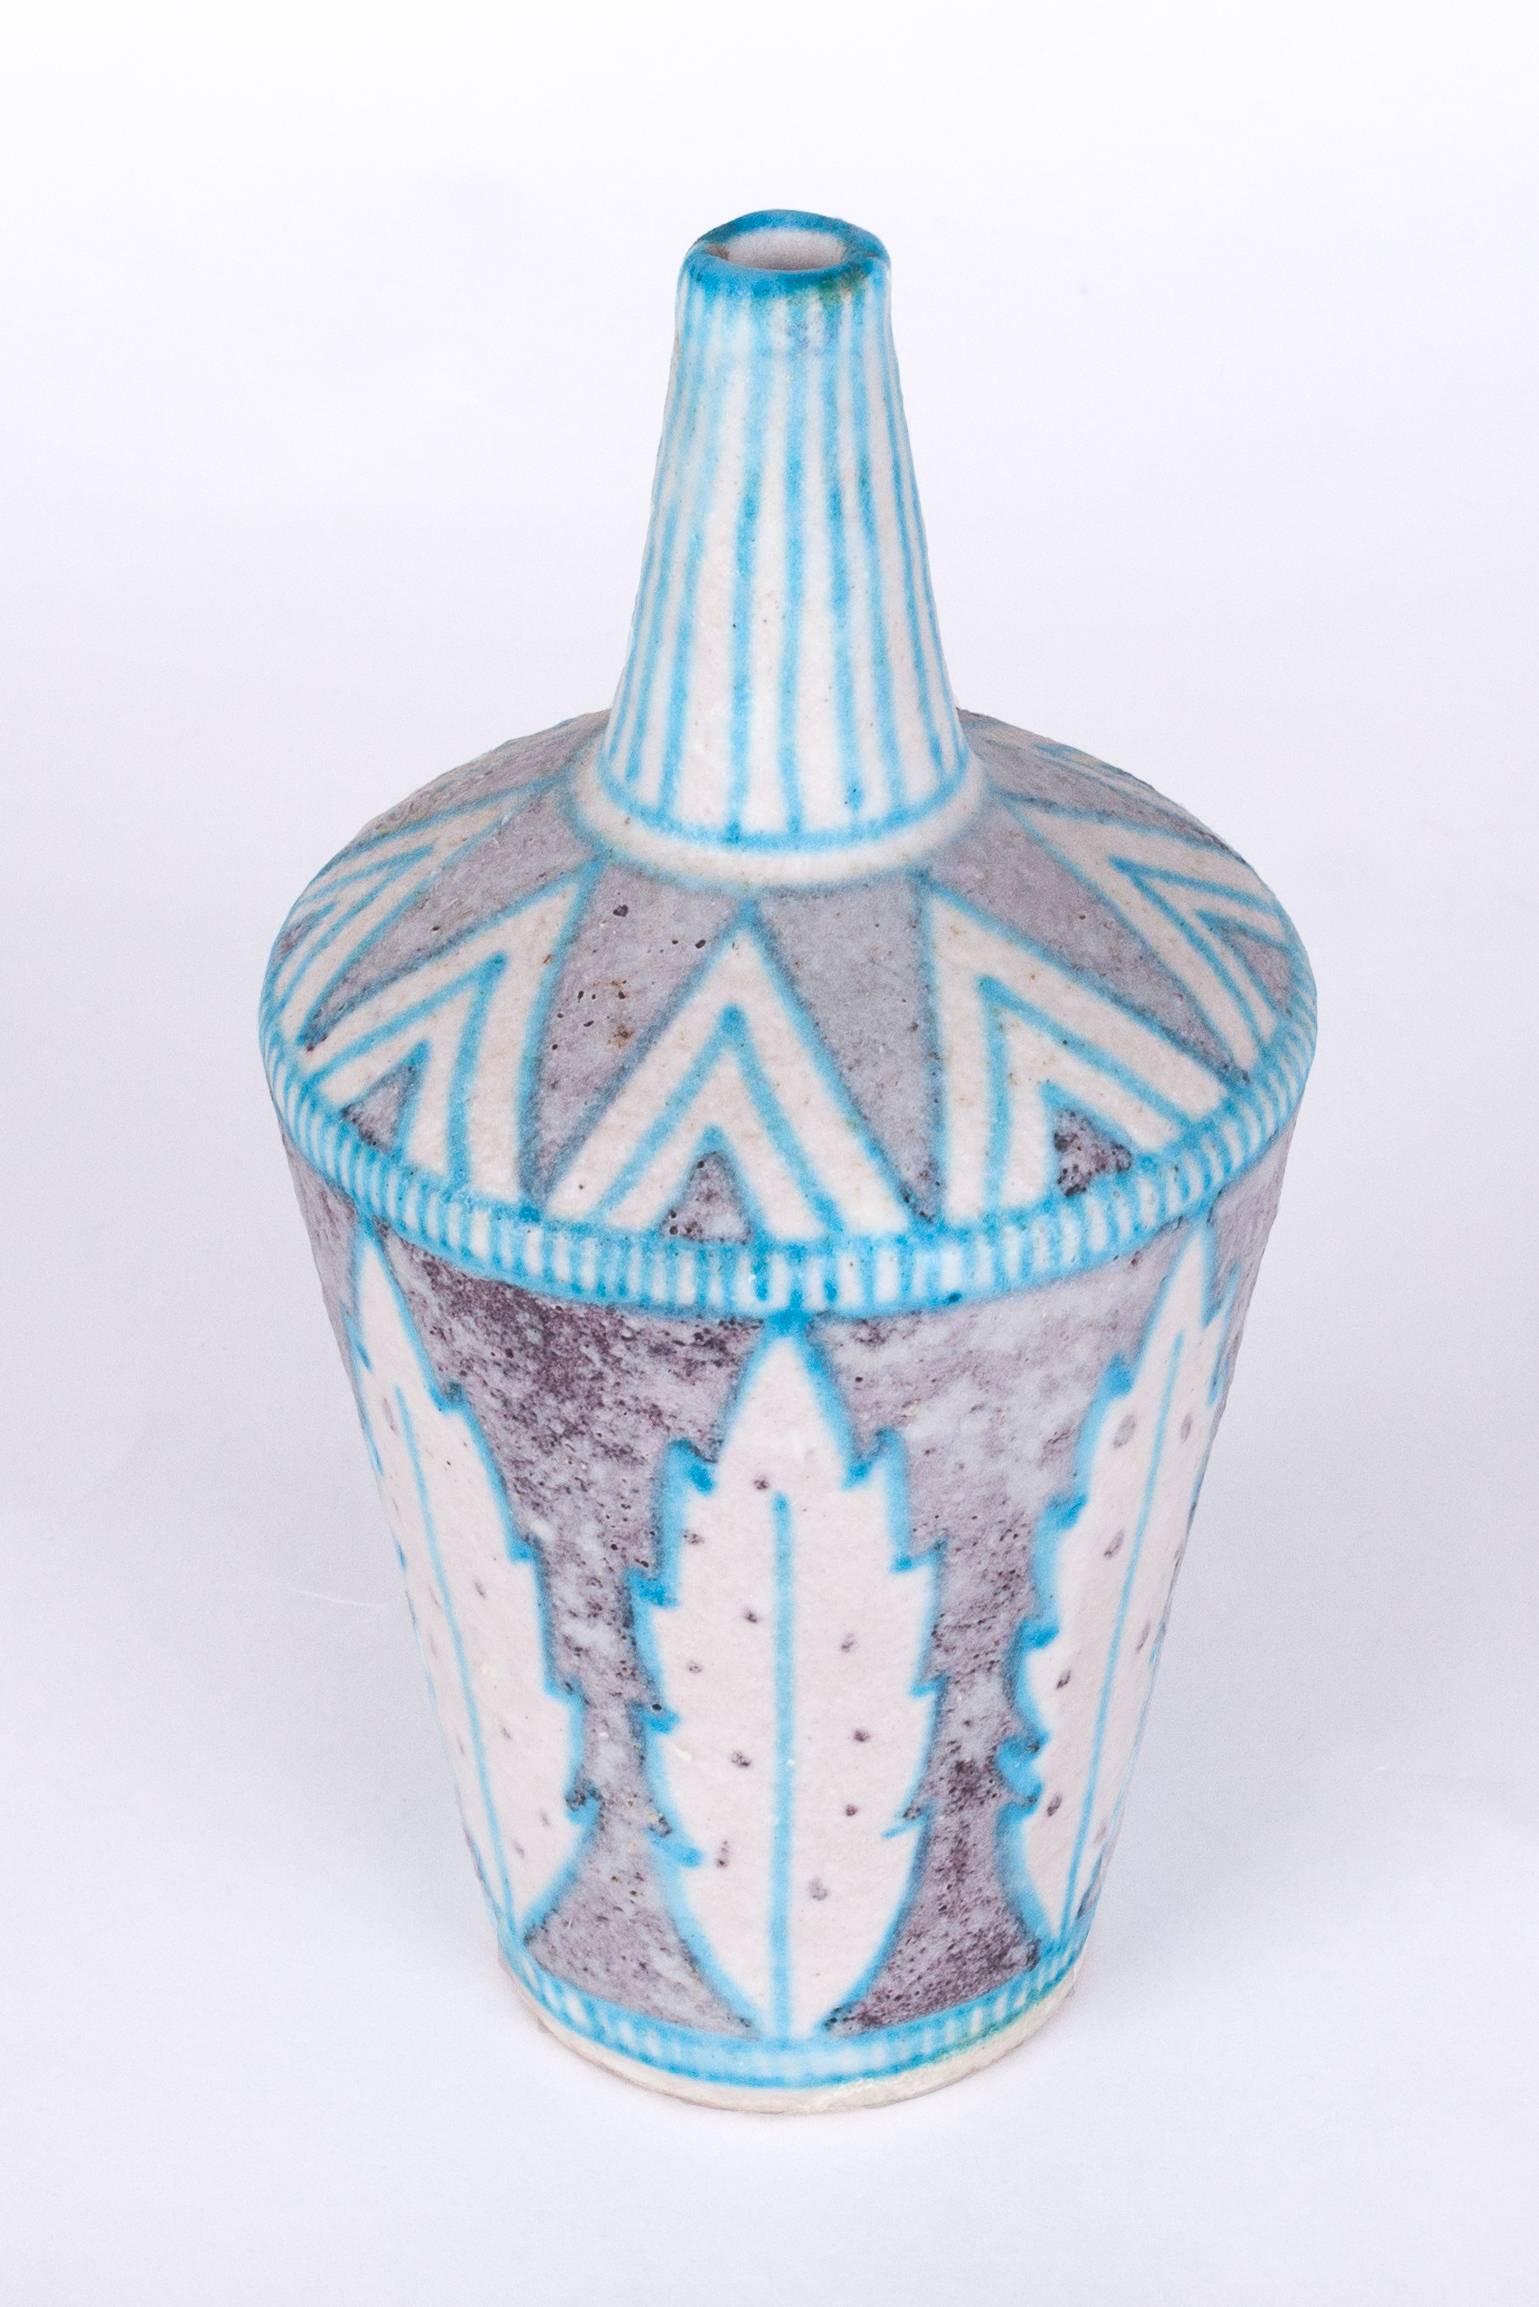 Attractive, lively glazed ceramic C.A.S. Vietri vase in the style of Guido Gambone, with a graceful leaf and imbricated triangle motif. Hand-thrown with blue, brown, and white salt glaze.

Signed on underside “C.A.S. Vietri Italy 432”.